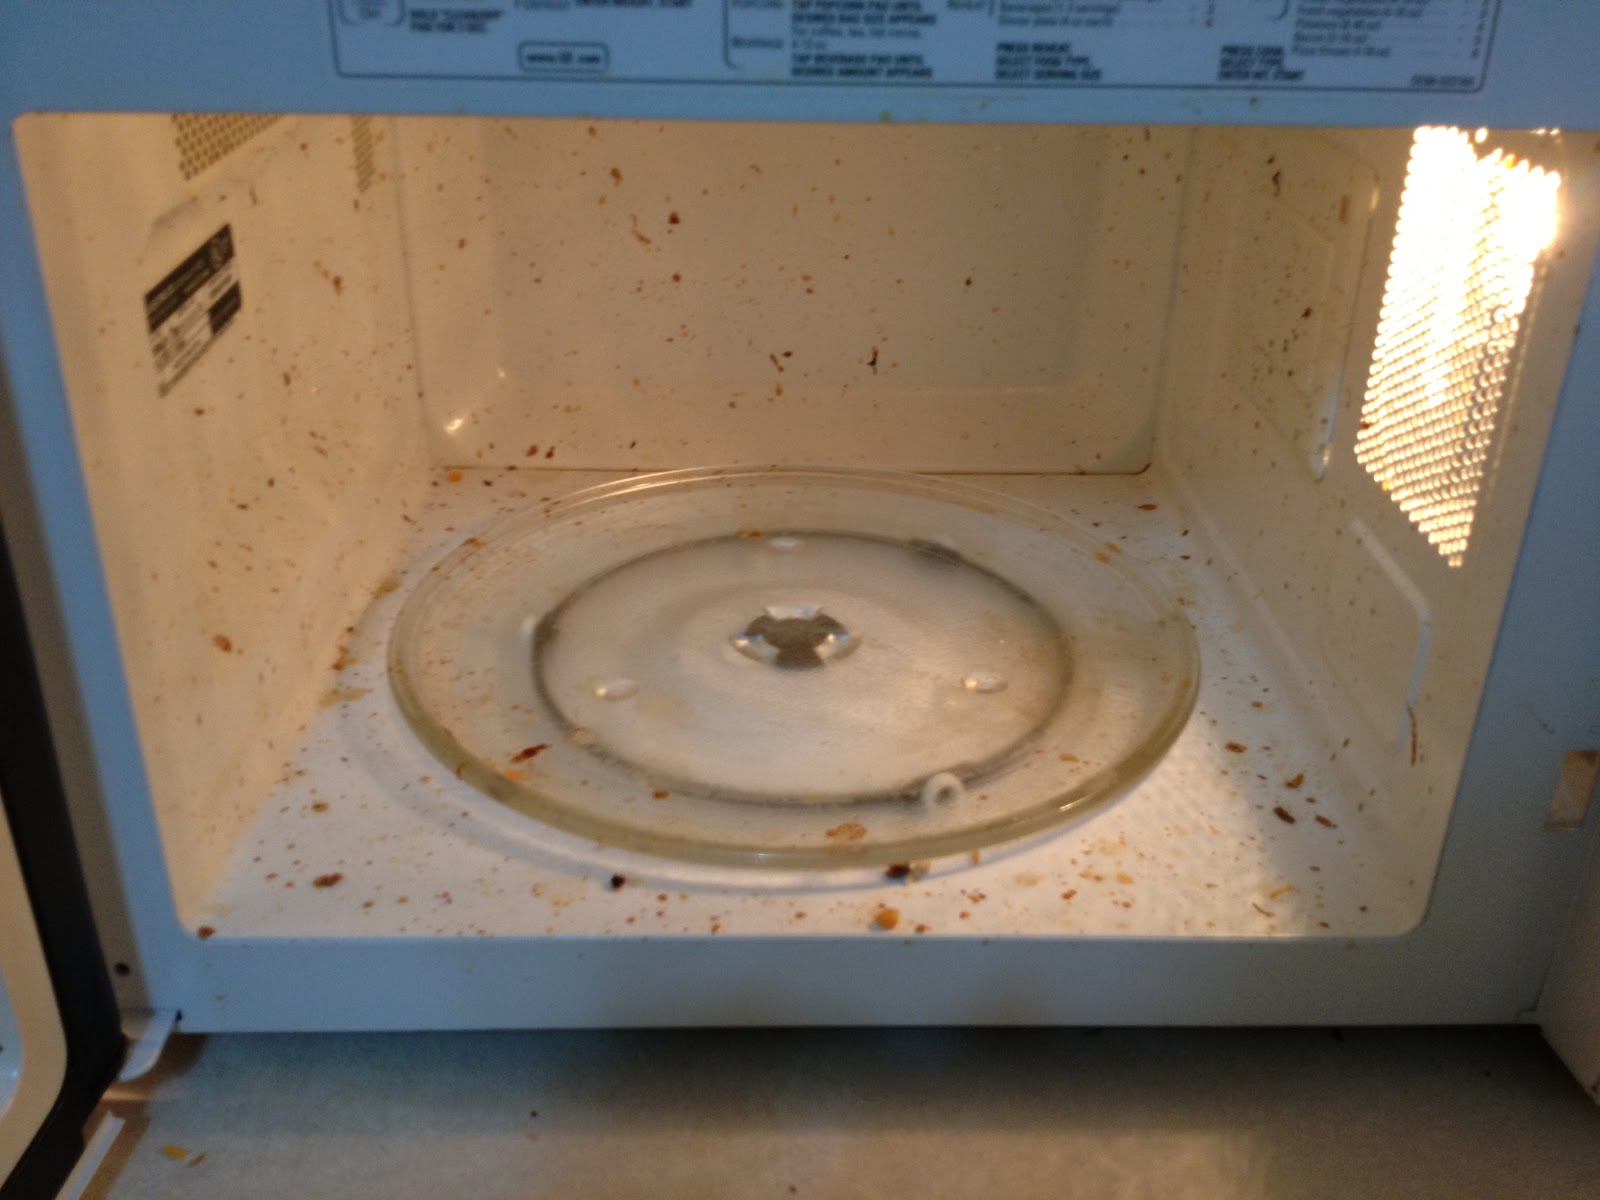 Easily Clean a Dirty Microwave